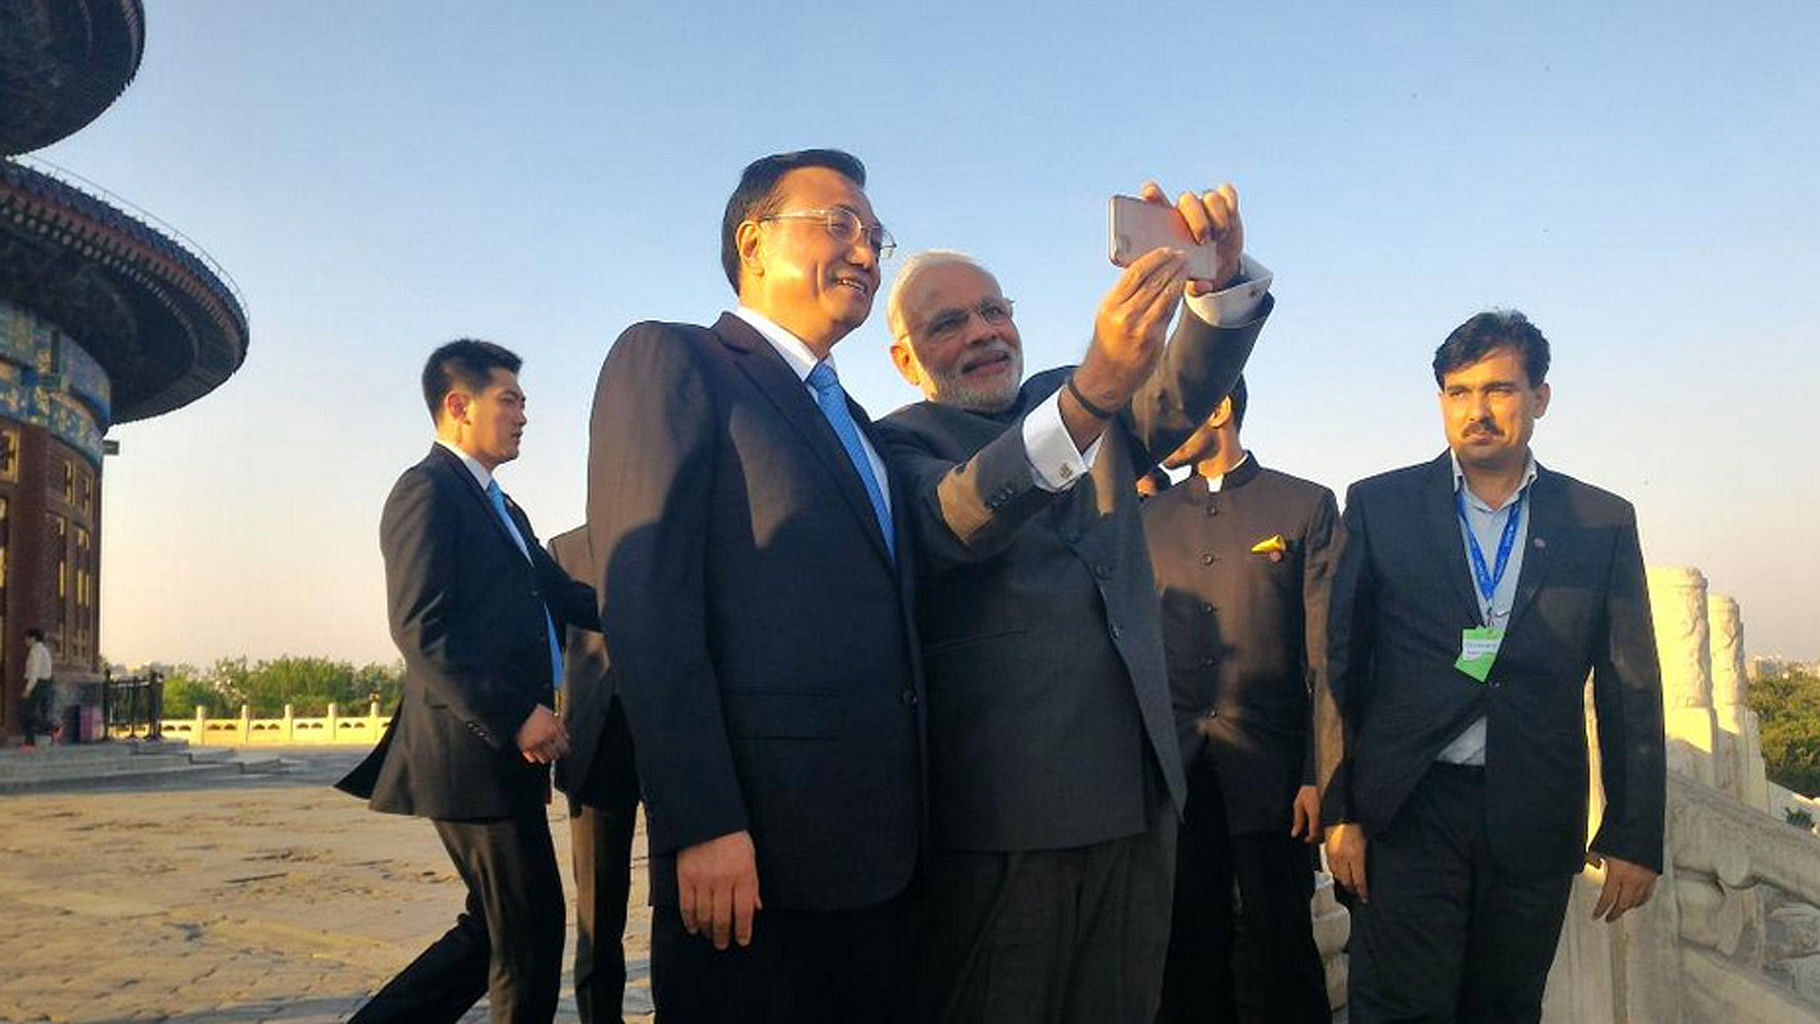 

Indian Prime Minister Narendra Modi with Chinese Premier Li Keqiang. <a href="https://twitter.com/meaindia">(Courtesy: Twitter/@MEAIndia)</a>